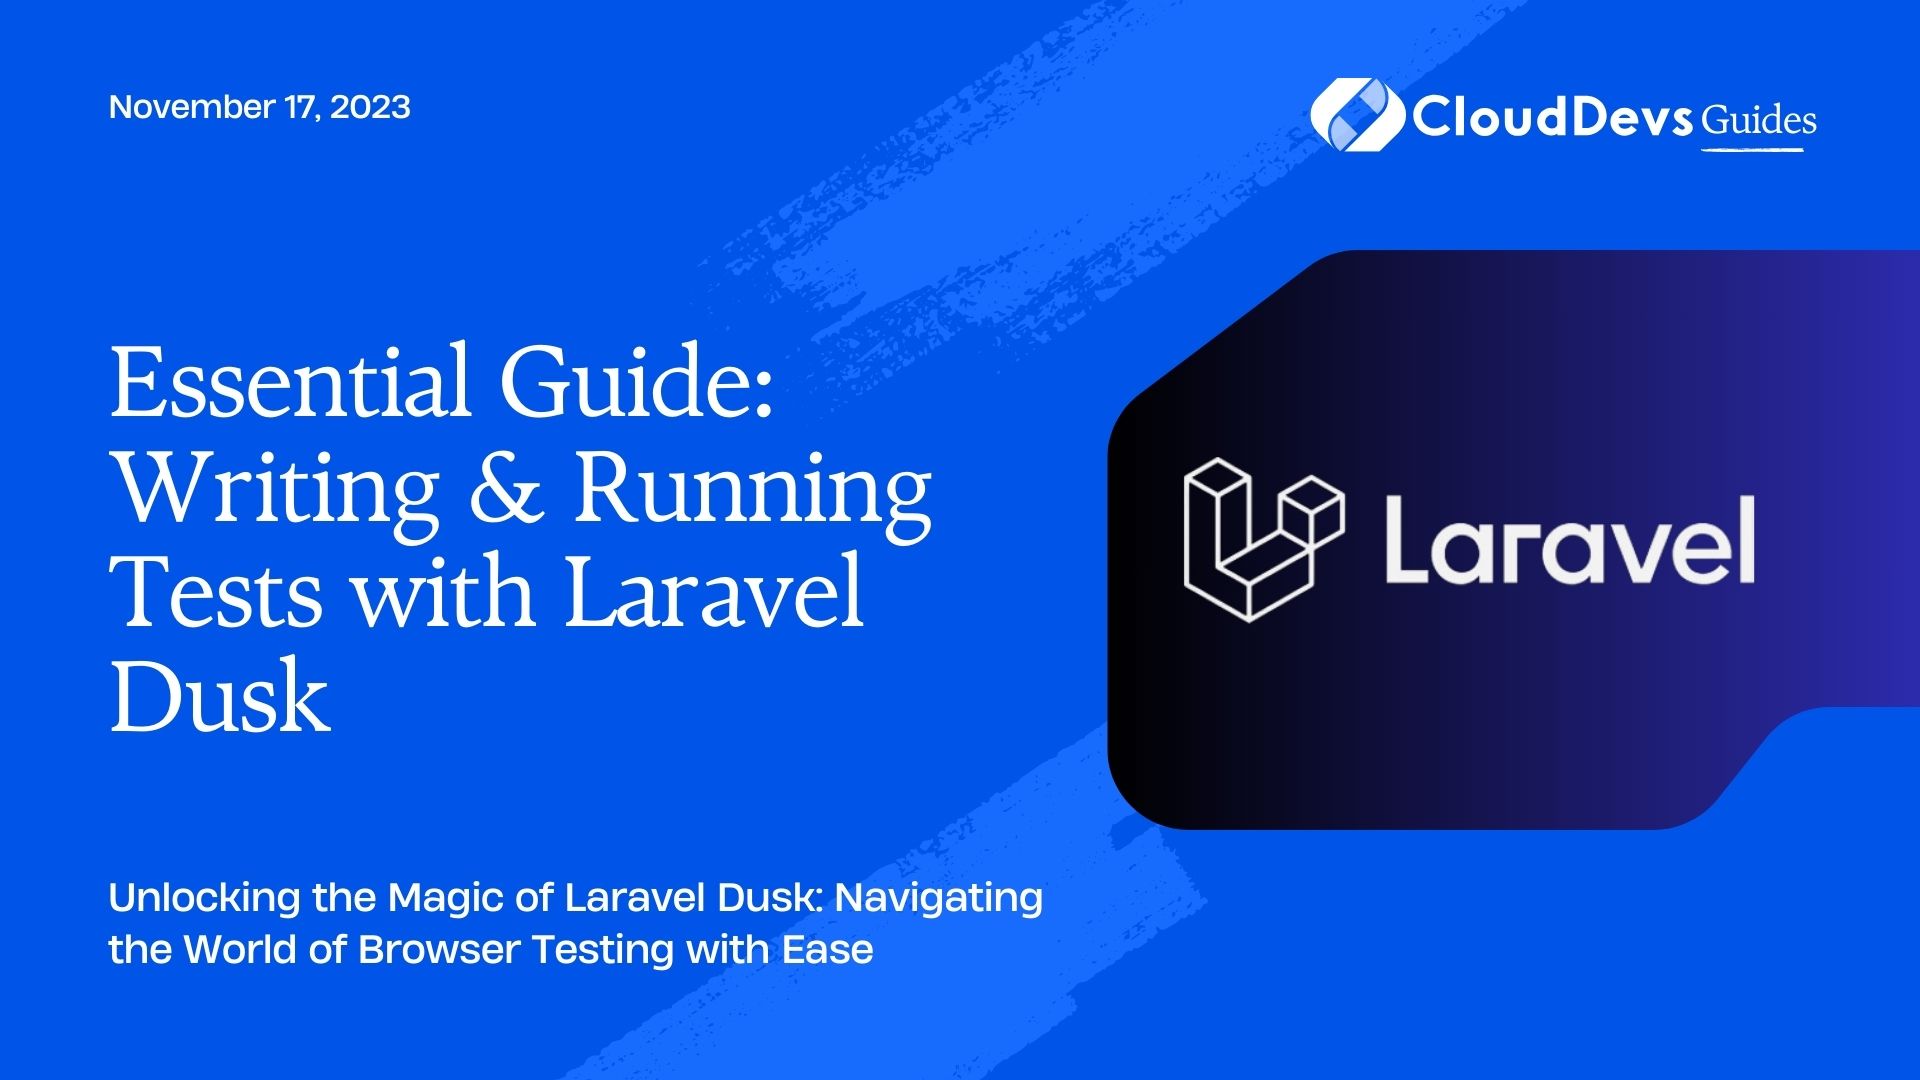 Essential Guide: Writing & Running Tests with Laravel Dusk